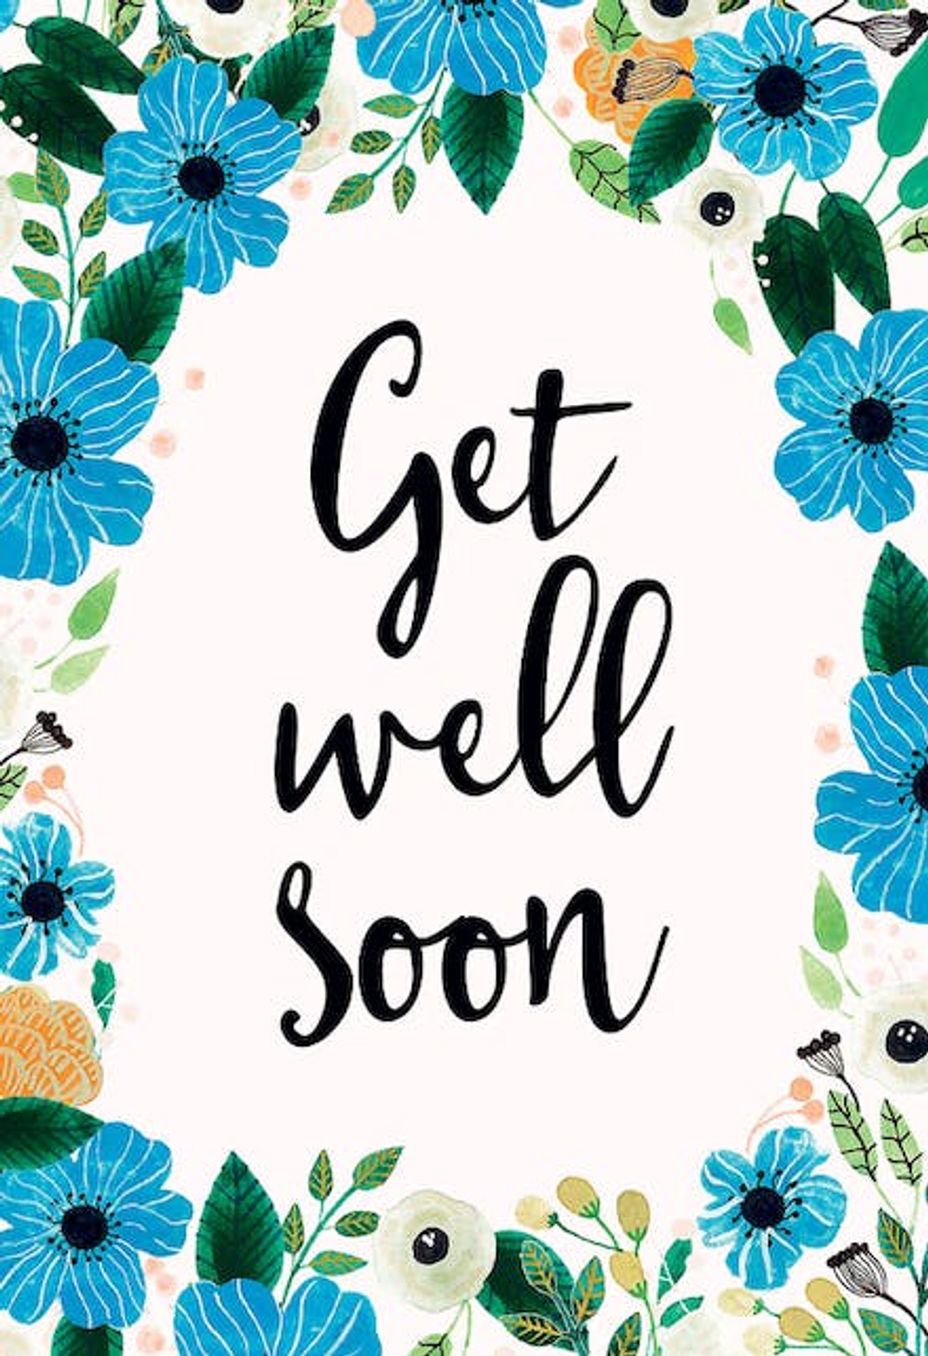 <p>Get well soon</p>